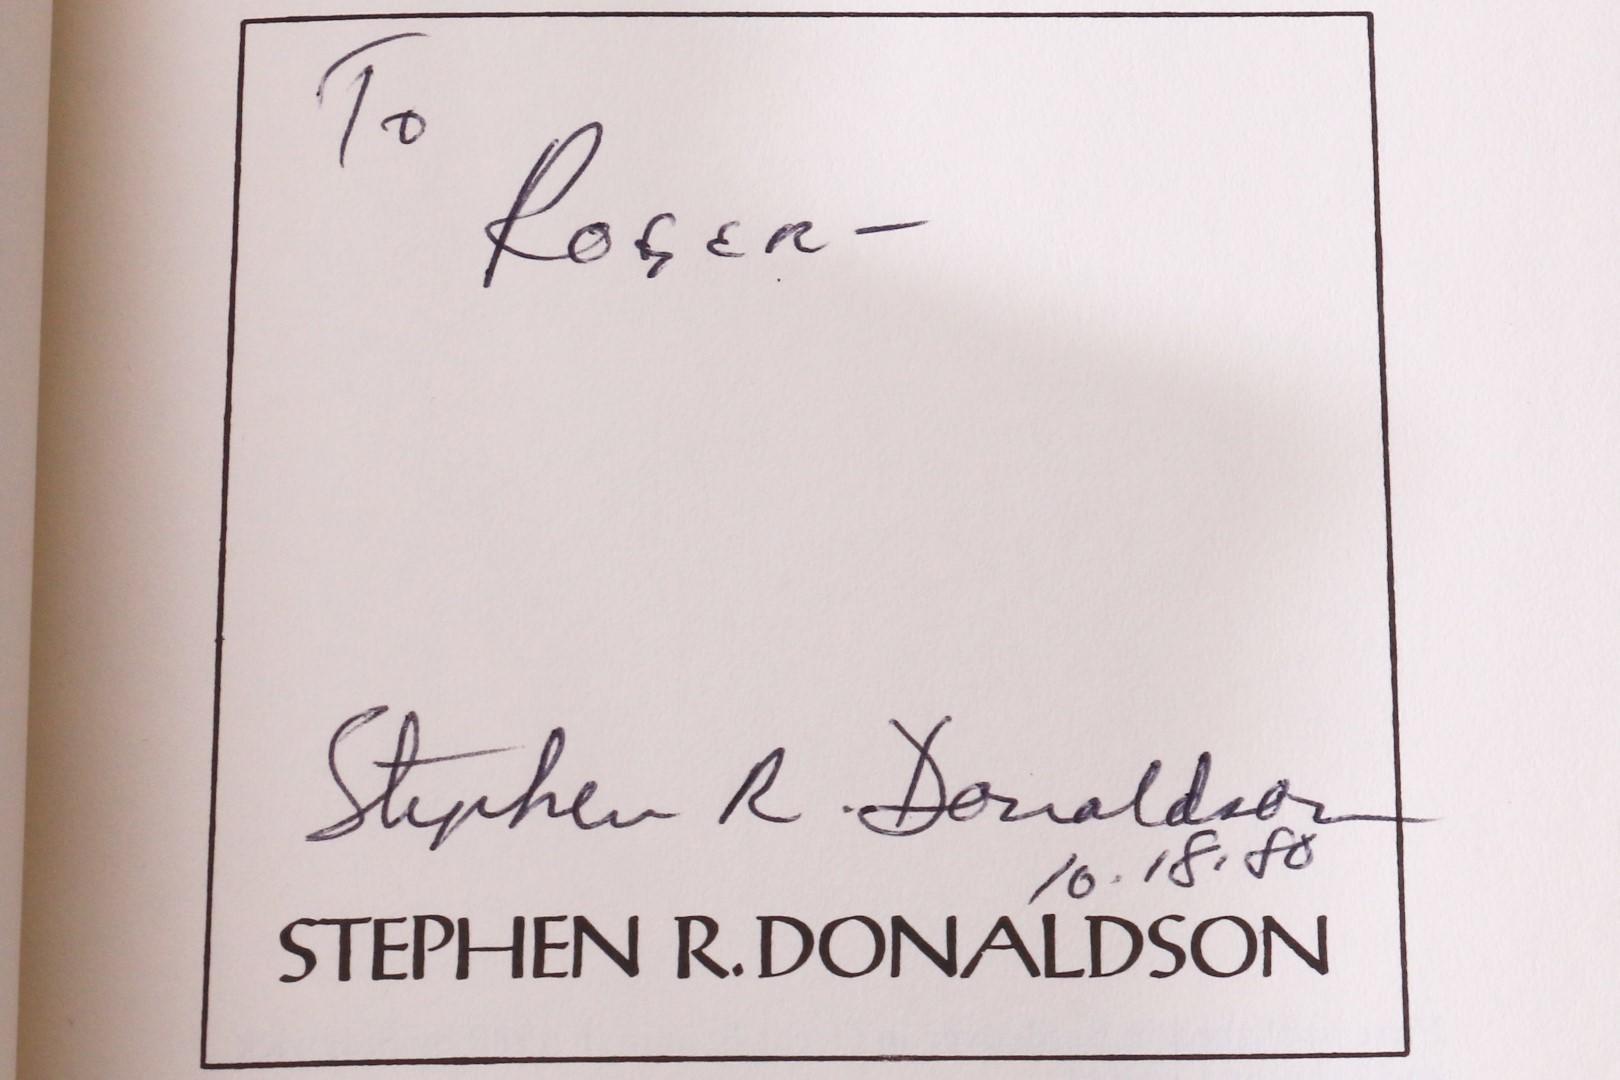 Stephen Donaldson - The Second Chronicles of Thomas Covenant [comprising] The Wounded Land, The One Tree, and White Gold Weilder - Sidgwick & Jackson / Collins, 1980-1983, Signed First Edition.